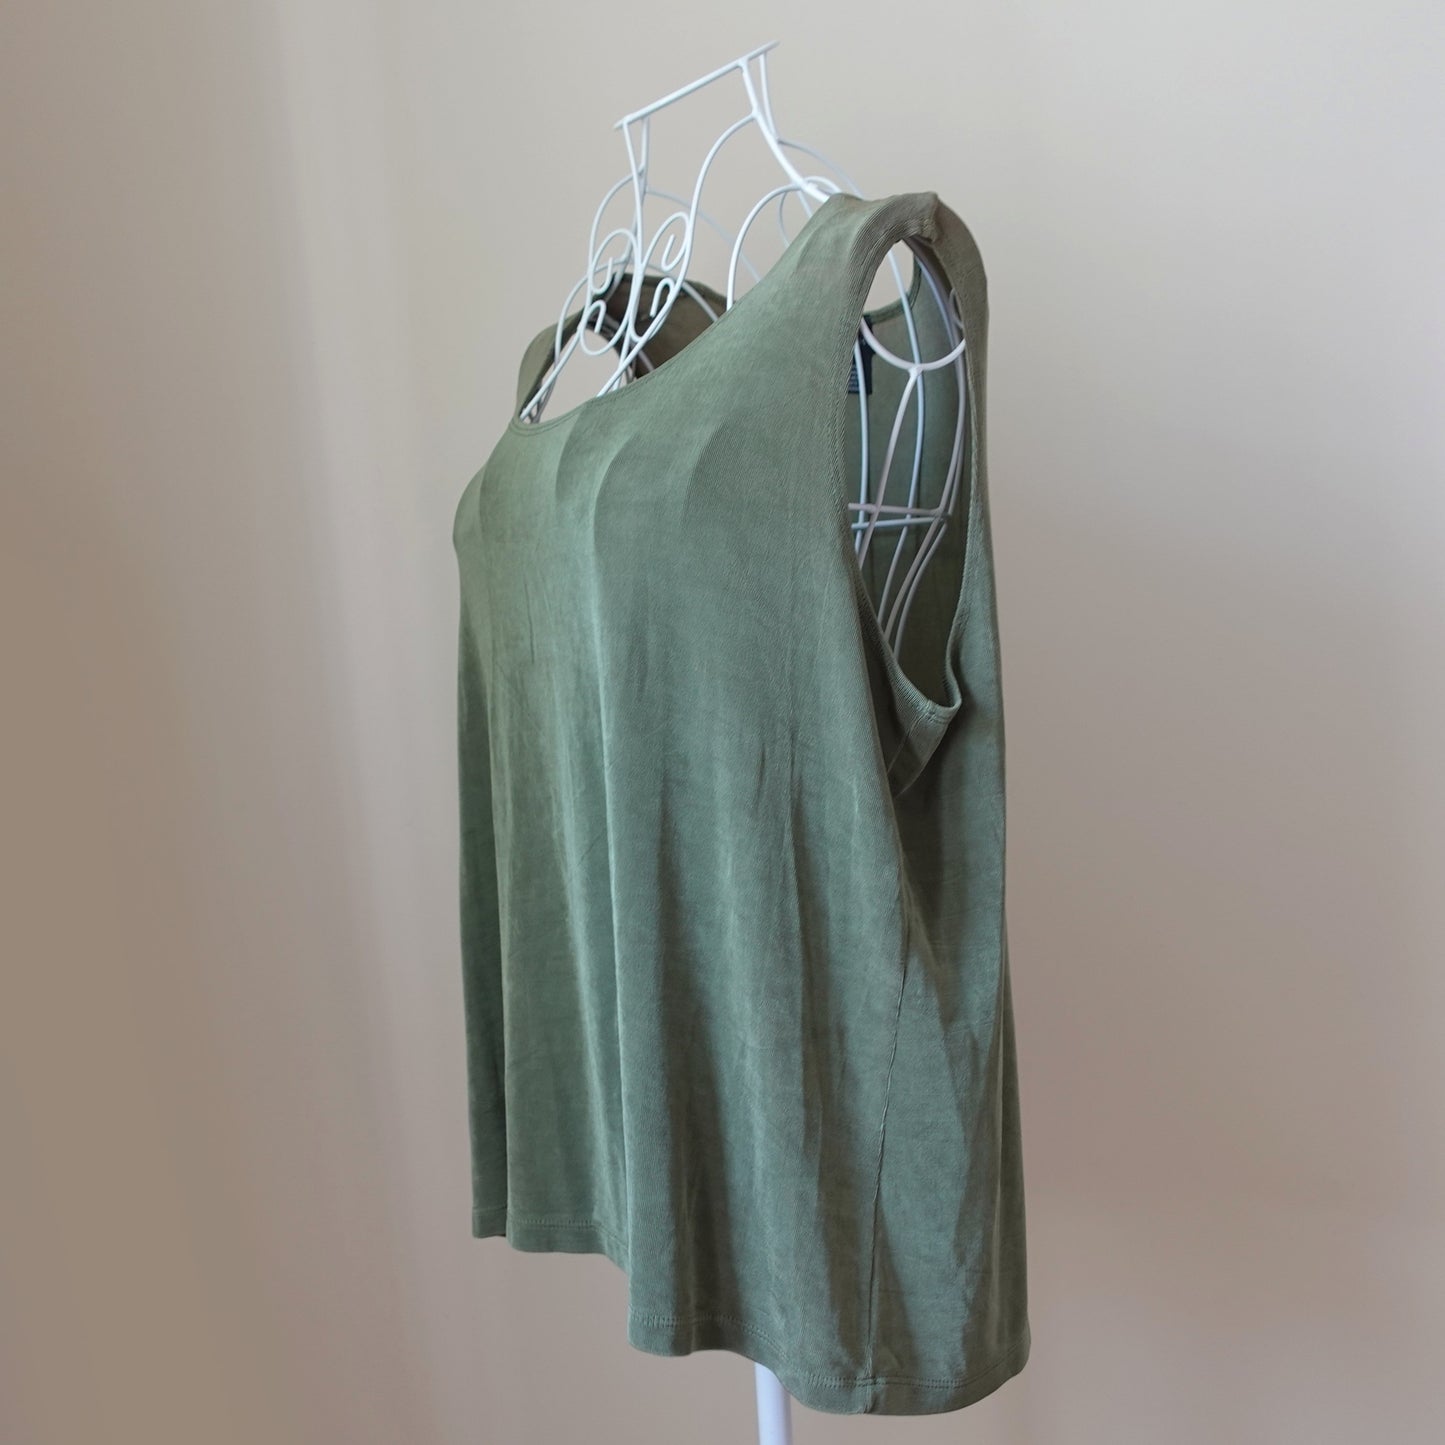 sage green sleeveless top with stretch